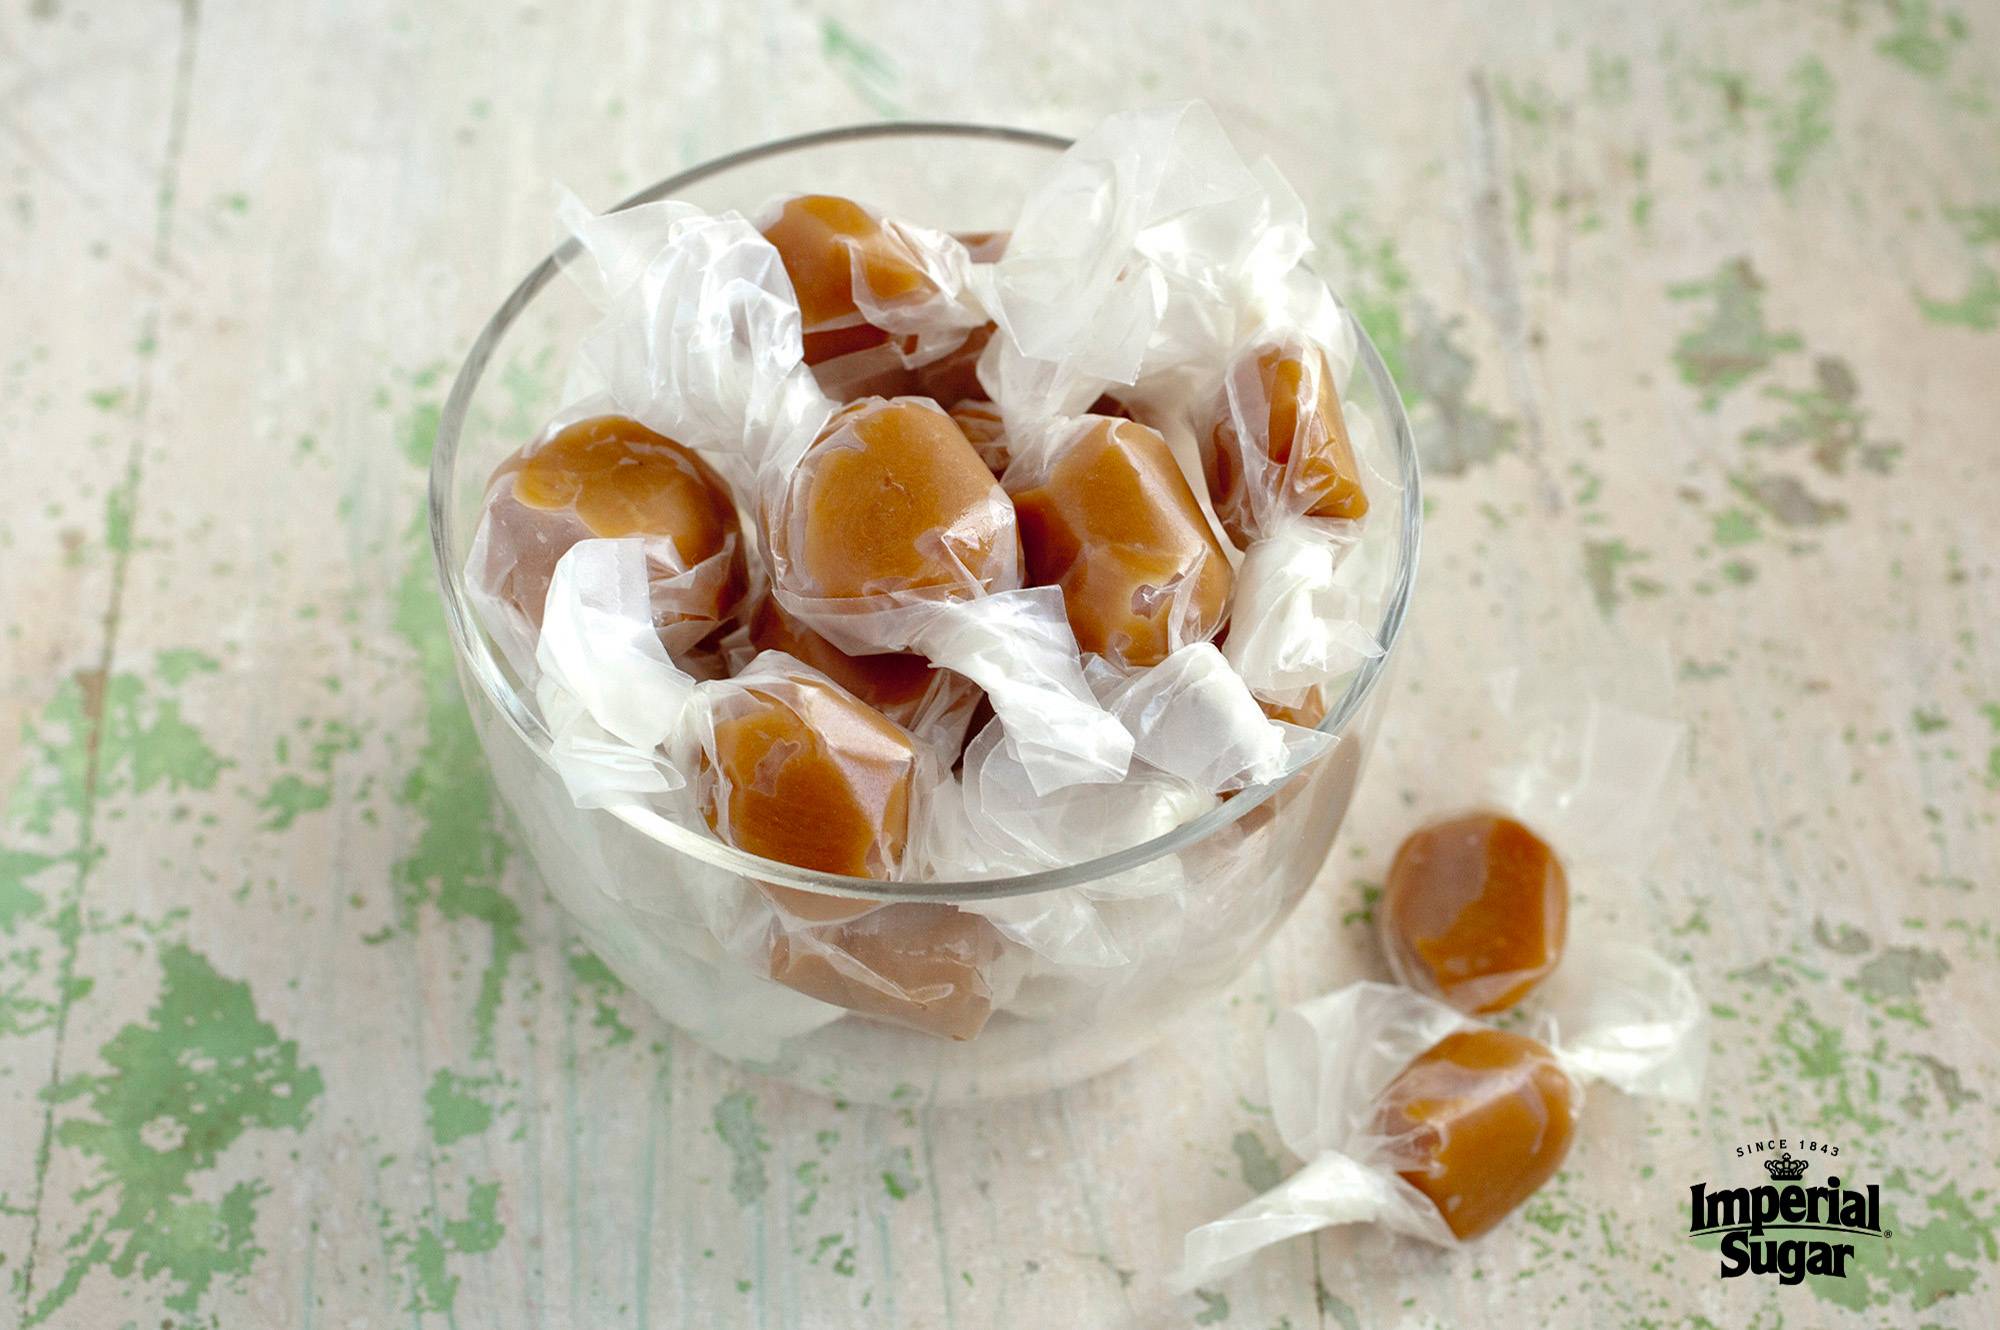 Easy Microwave Caramels - Spend With Pennies